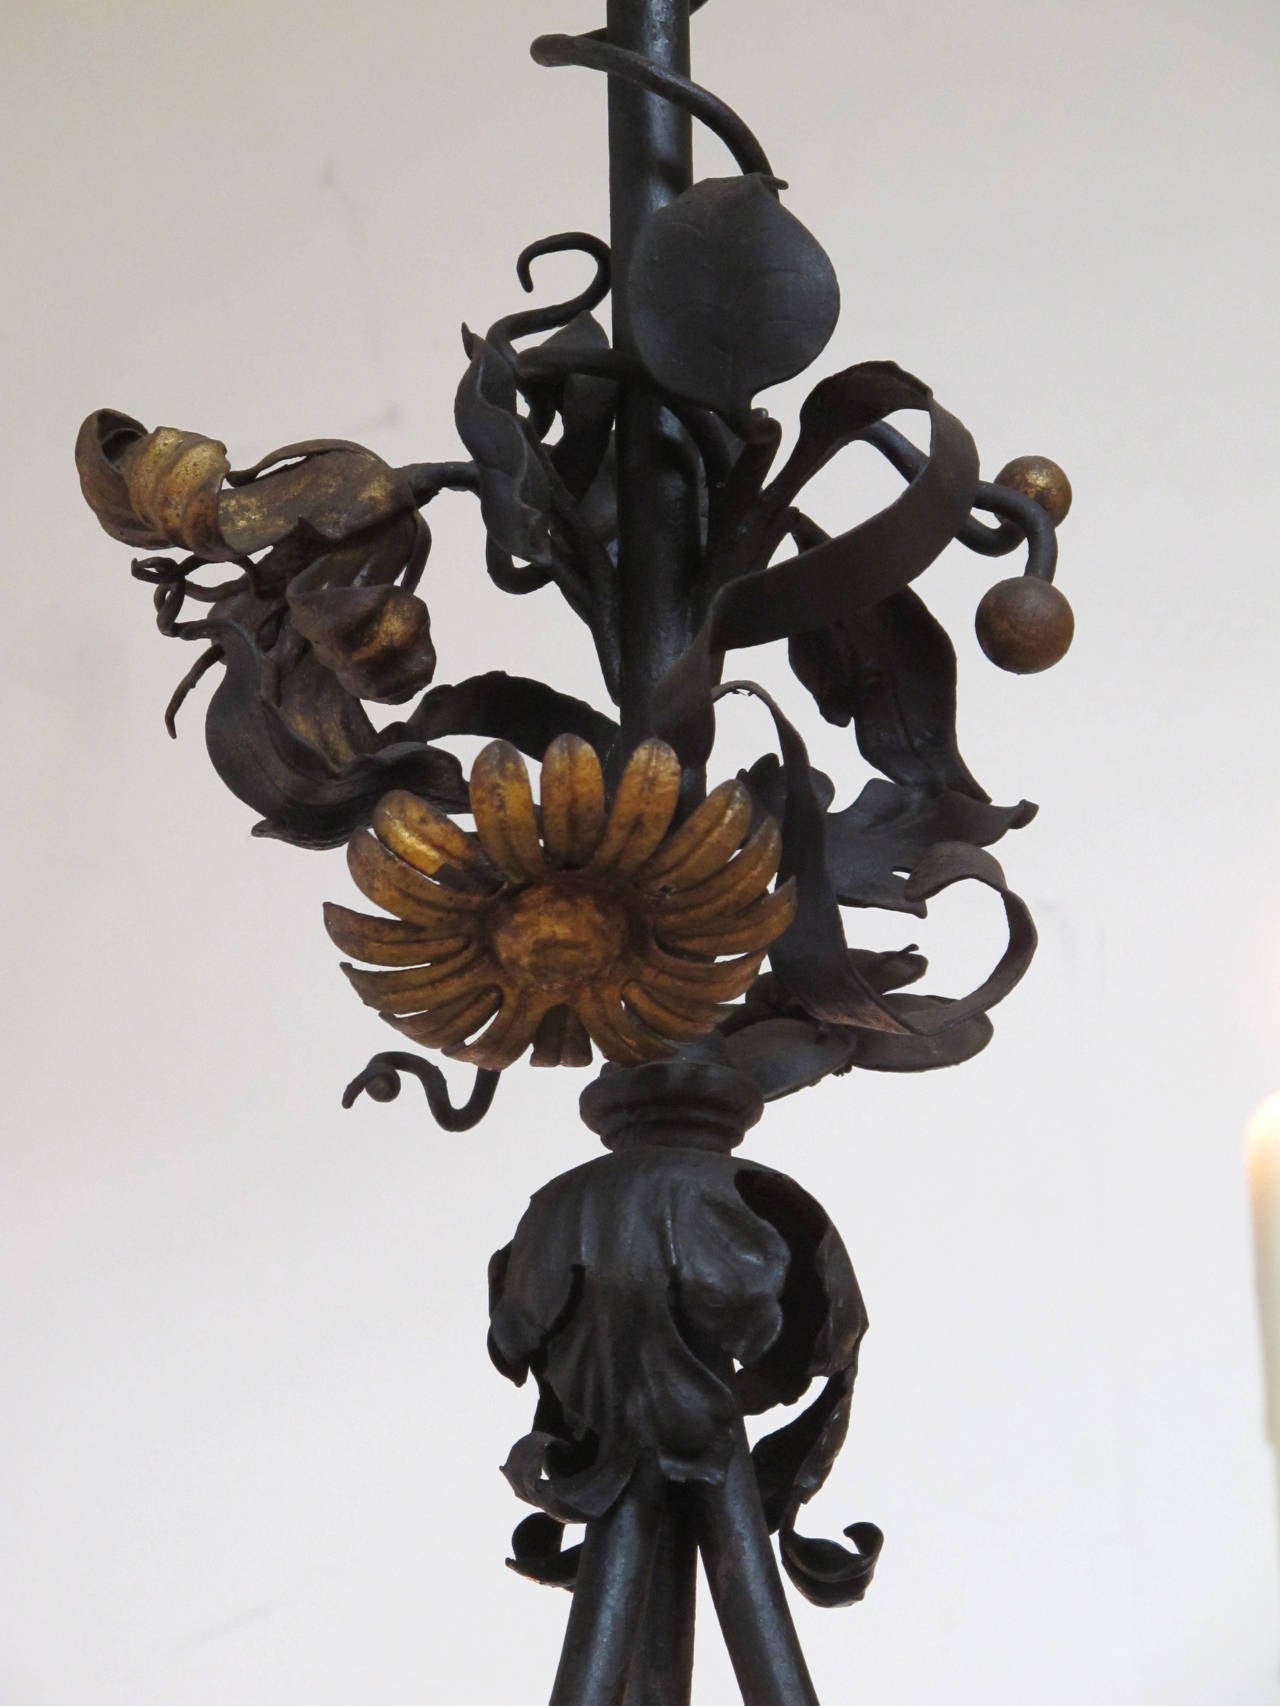 19th Century Faniciful Belgian Six-Light Iron Chandelier with Floral and Foliate Vine